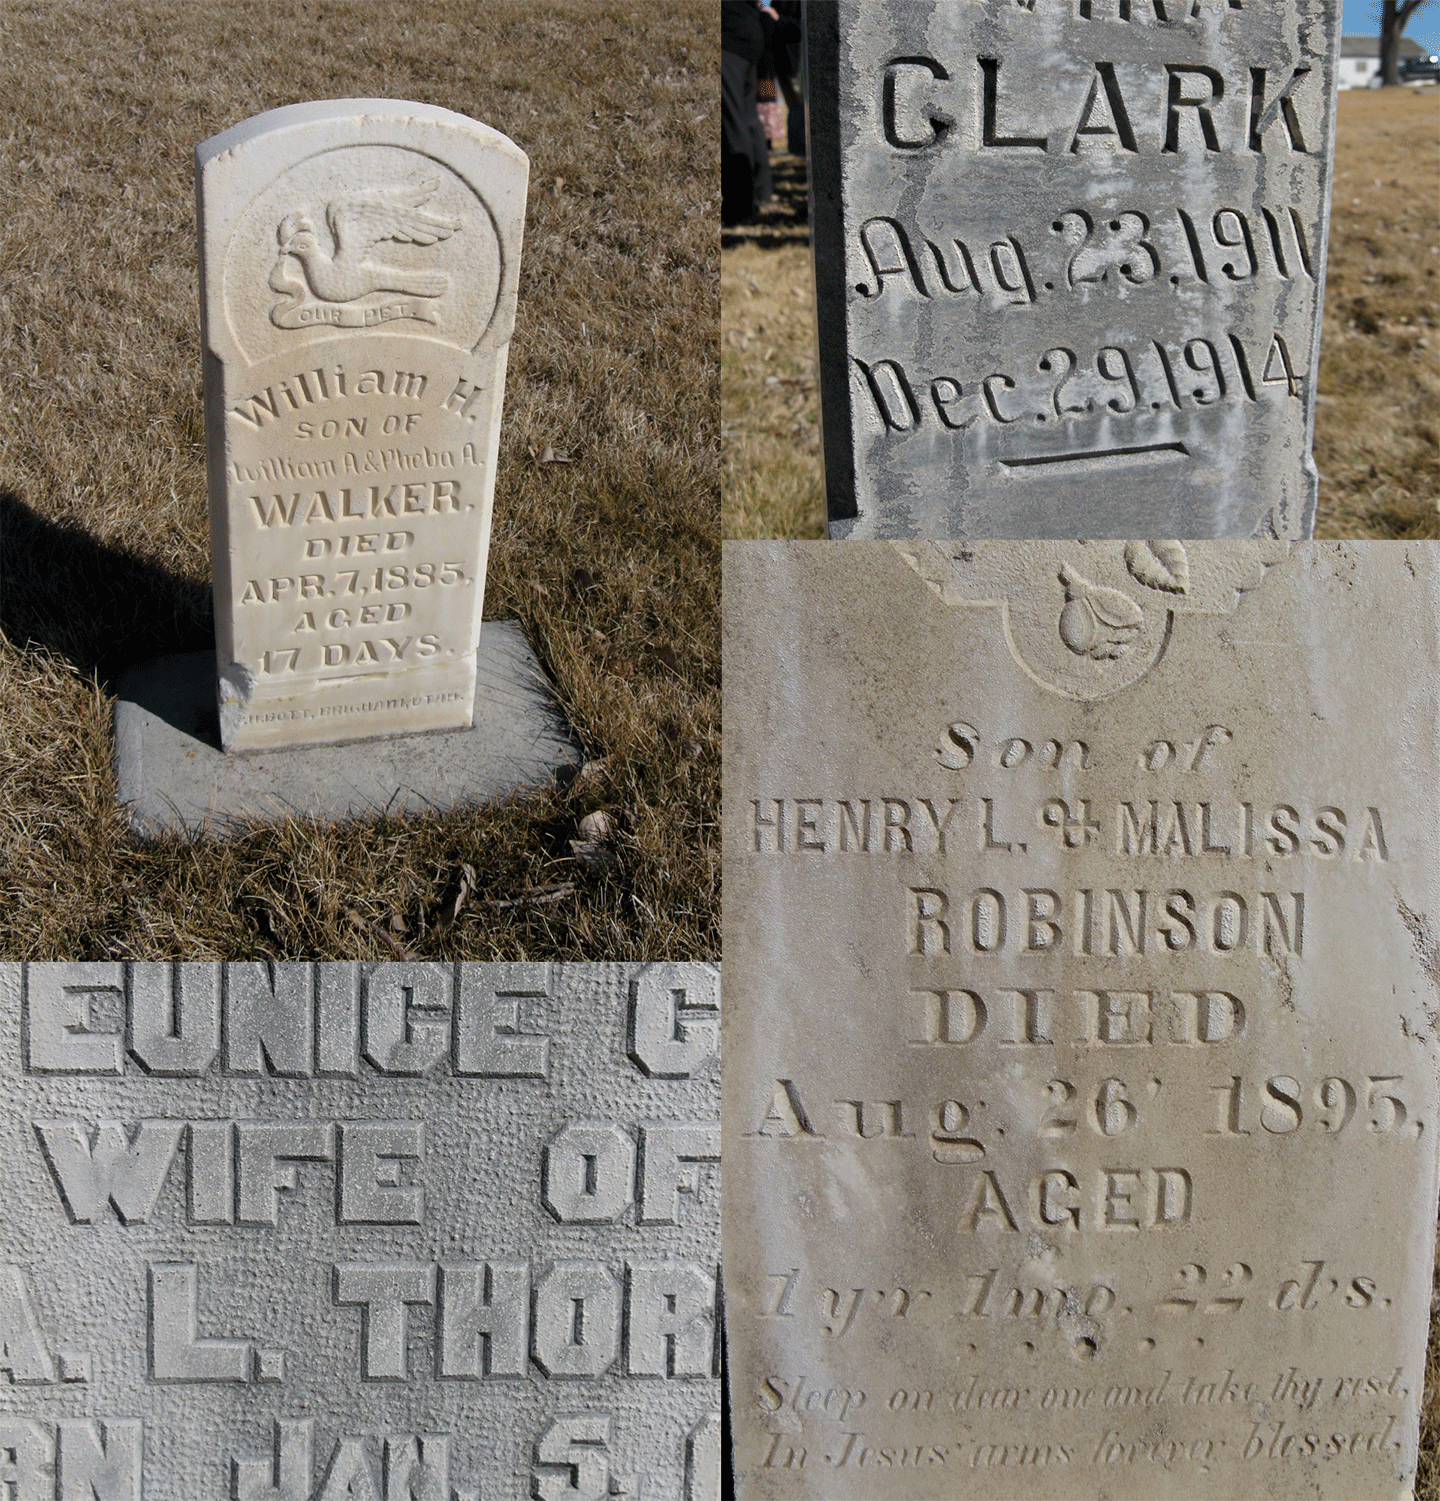 Valley View Cemetery in Rockland, Idaho